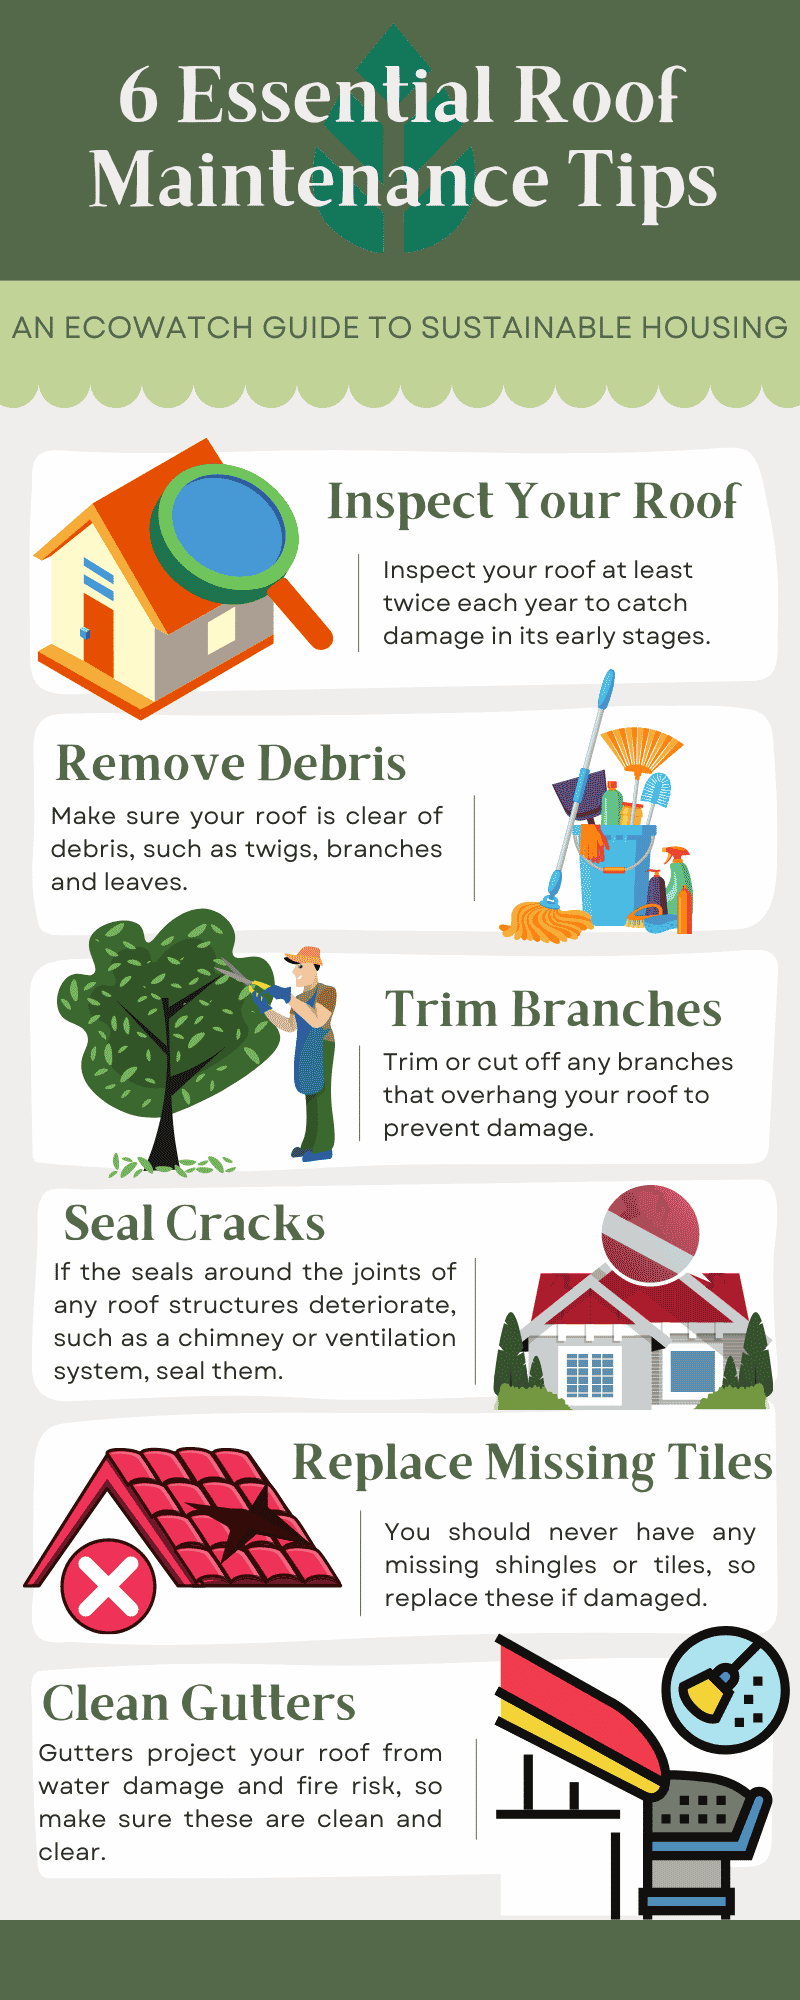 5 Essential Roof Maintenance Tips